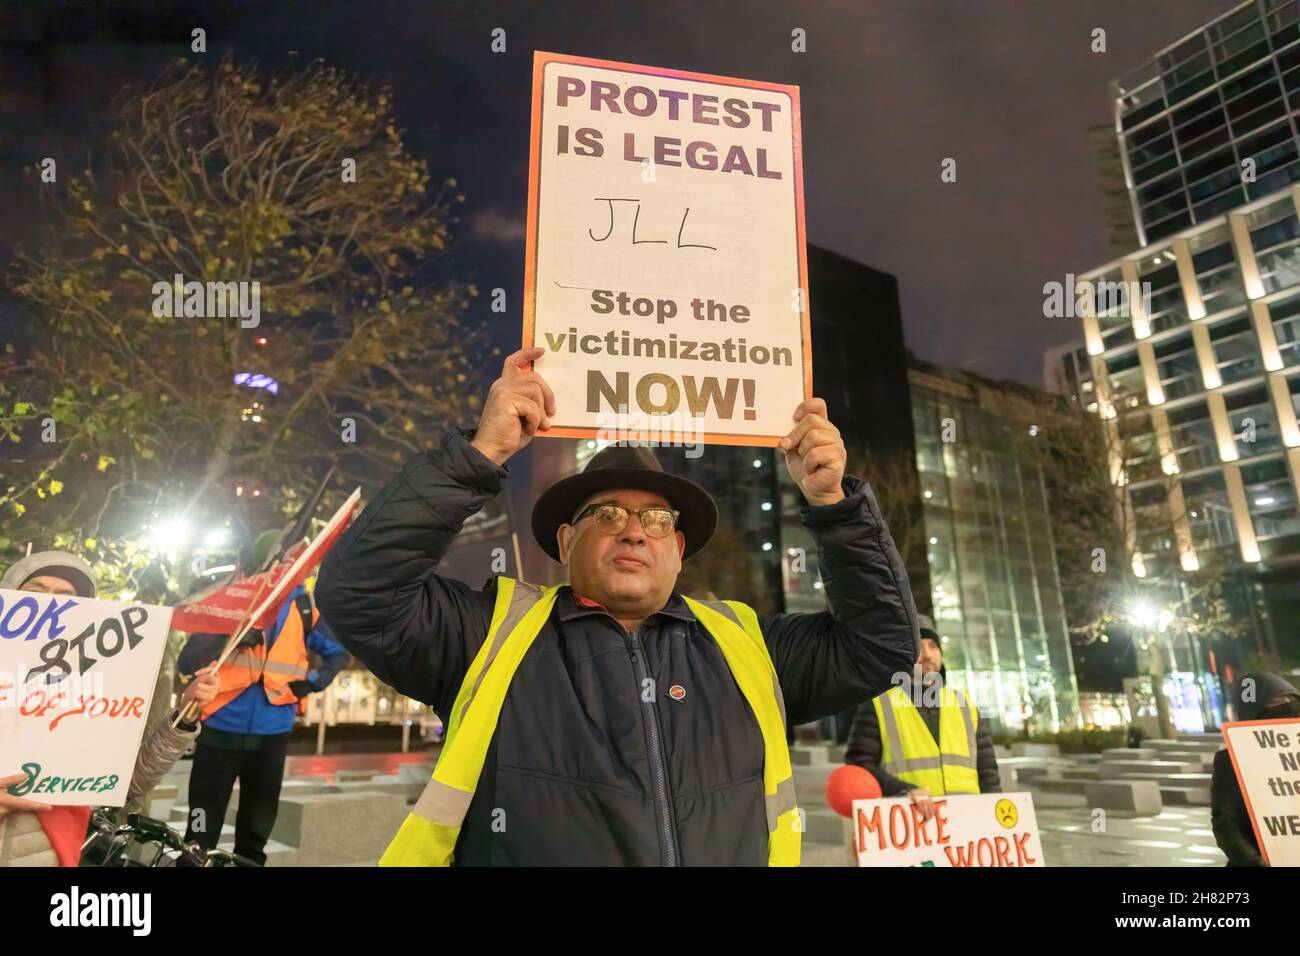 A protestor is seen holding a placard that says 'protest is legal, JLL stop the victimization now!' during a protest outside Facebook headquarters at Warren Street in London.The group of protesters led by the Independent Workers Union protested at the Facebook London office after it increased workload without a salary increase. Jones Lang LaSalle (JLL) has outsourced the cleaning obligations to Churchill Services to clean the office of Facebook. Also, they allegedly mistreated the cleaners which resulted in the protest. (Photo by Belinda Jiao/SOPA Images/Sipa USA) Stock Photo